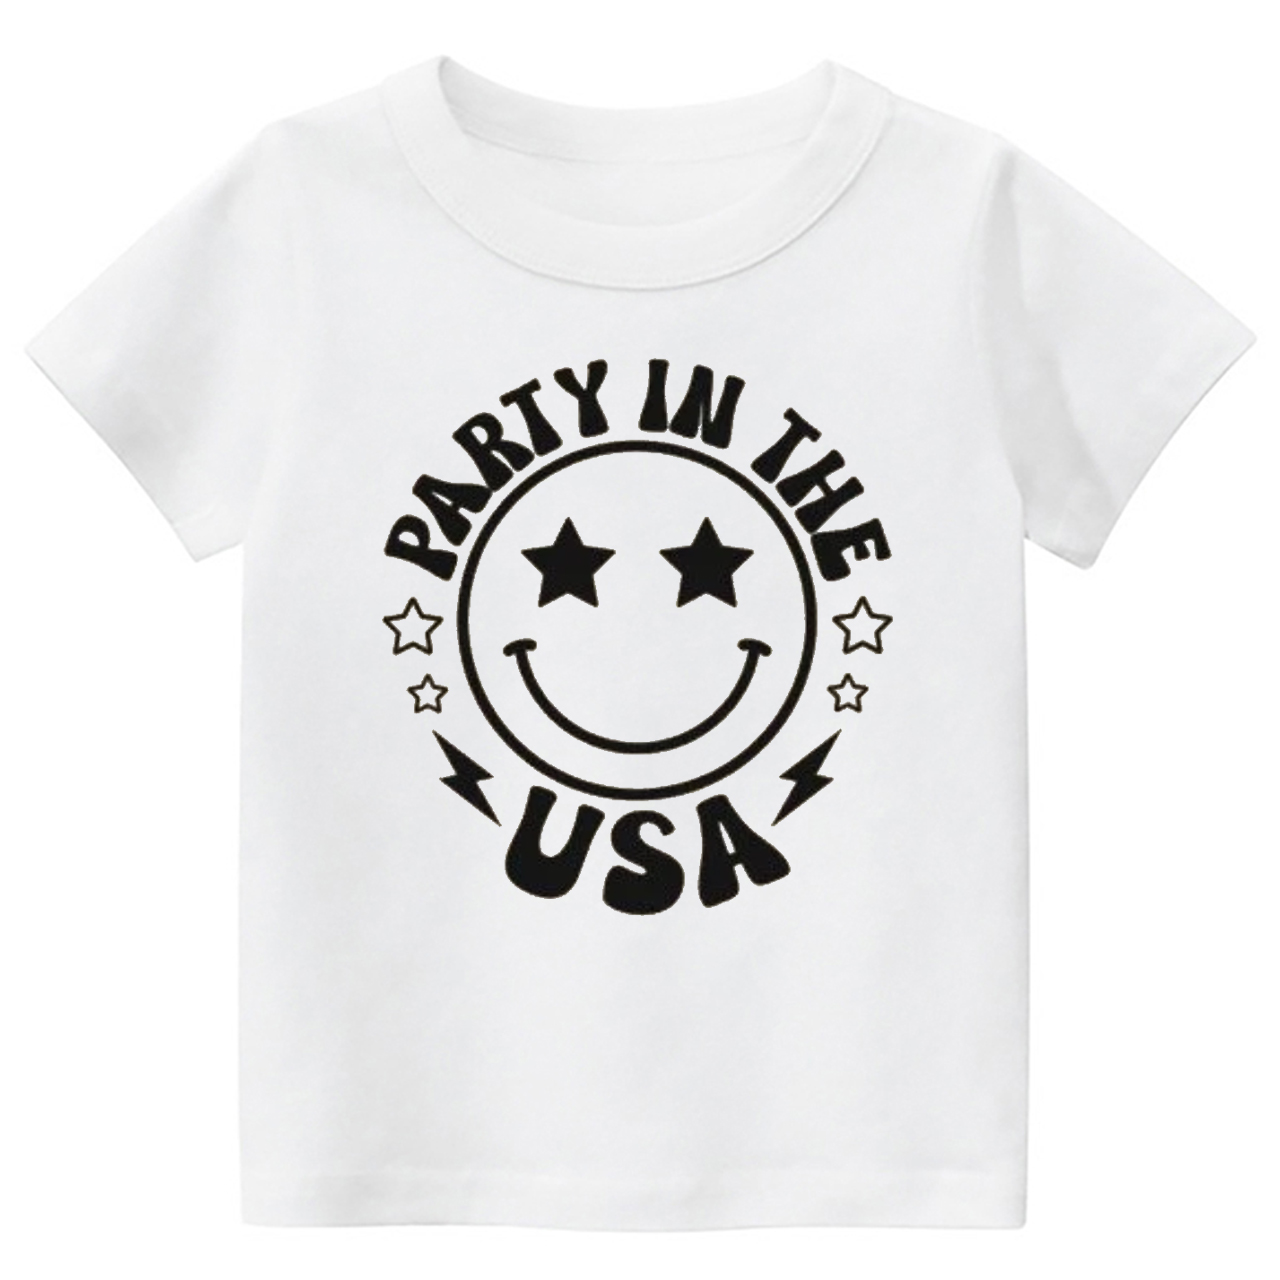 Party In The USA Smiley Face Toddler Shirt